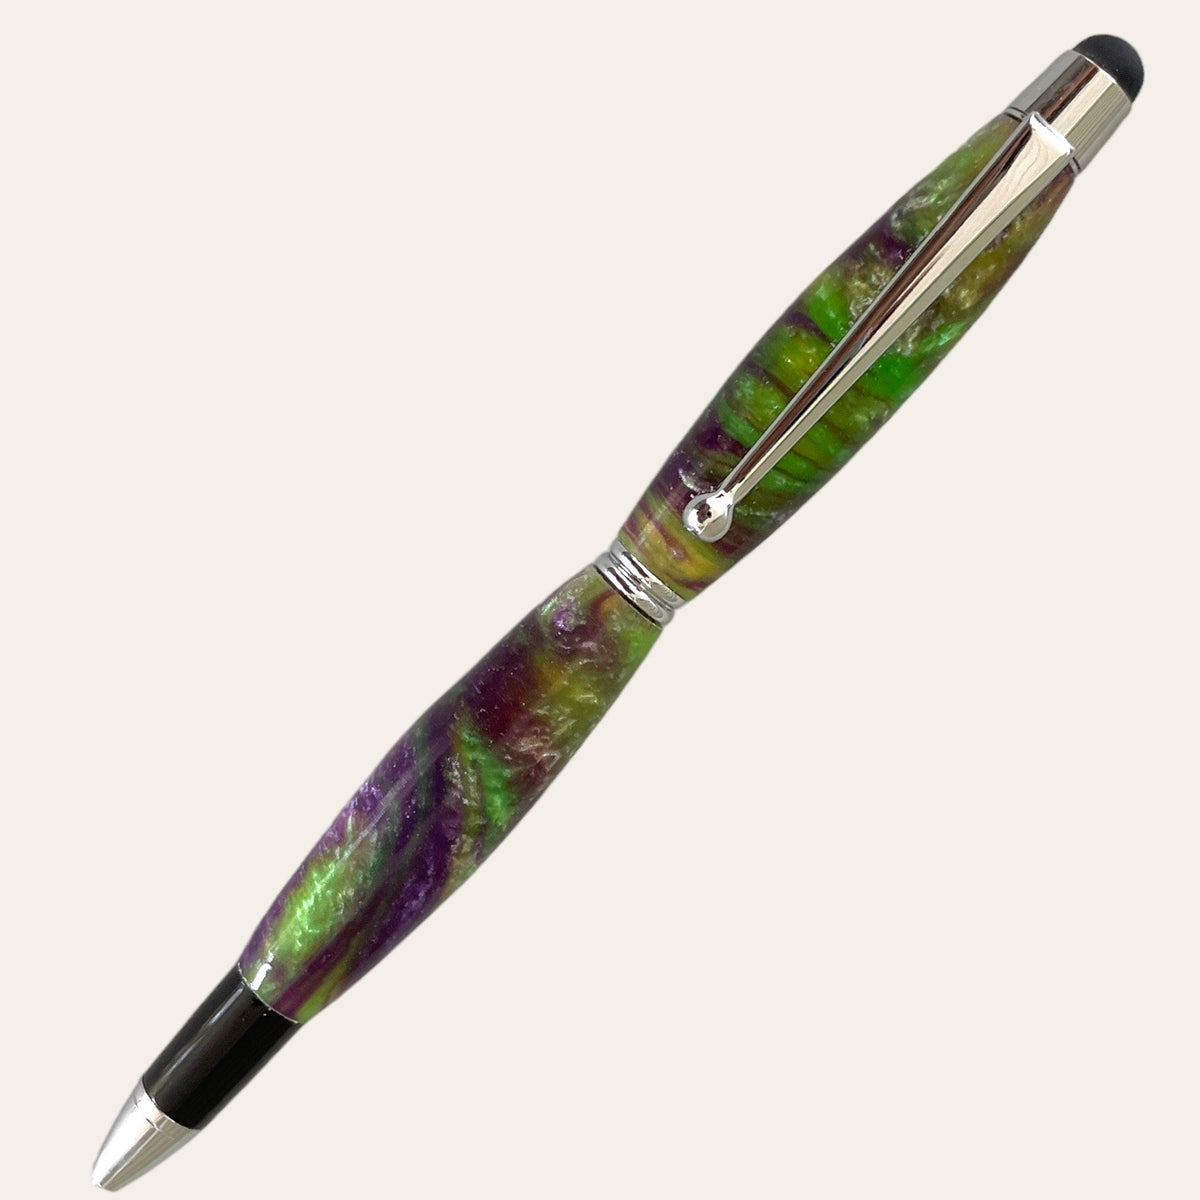 Stylus refillable pen made with resin with purple and lime coloring on a chrome trim. Paul's Hand Turned Creations